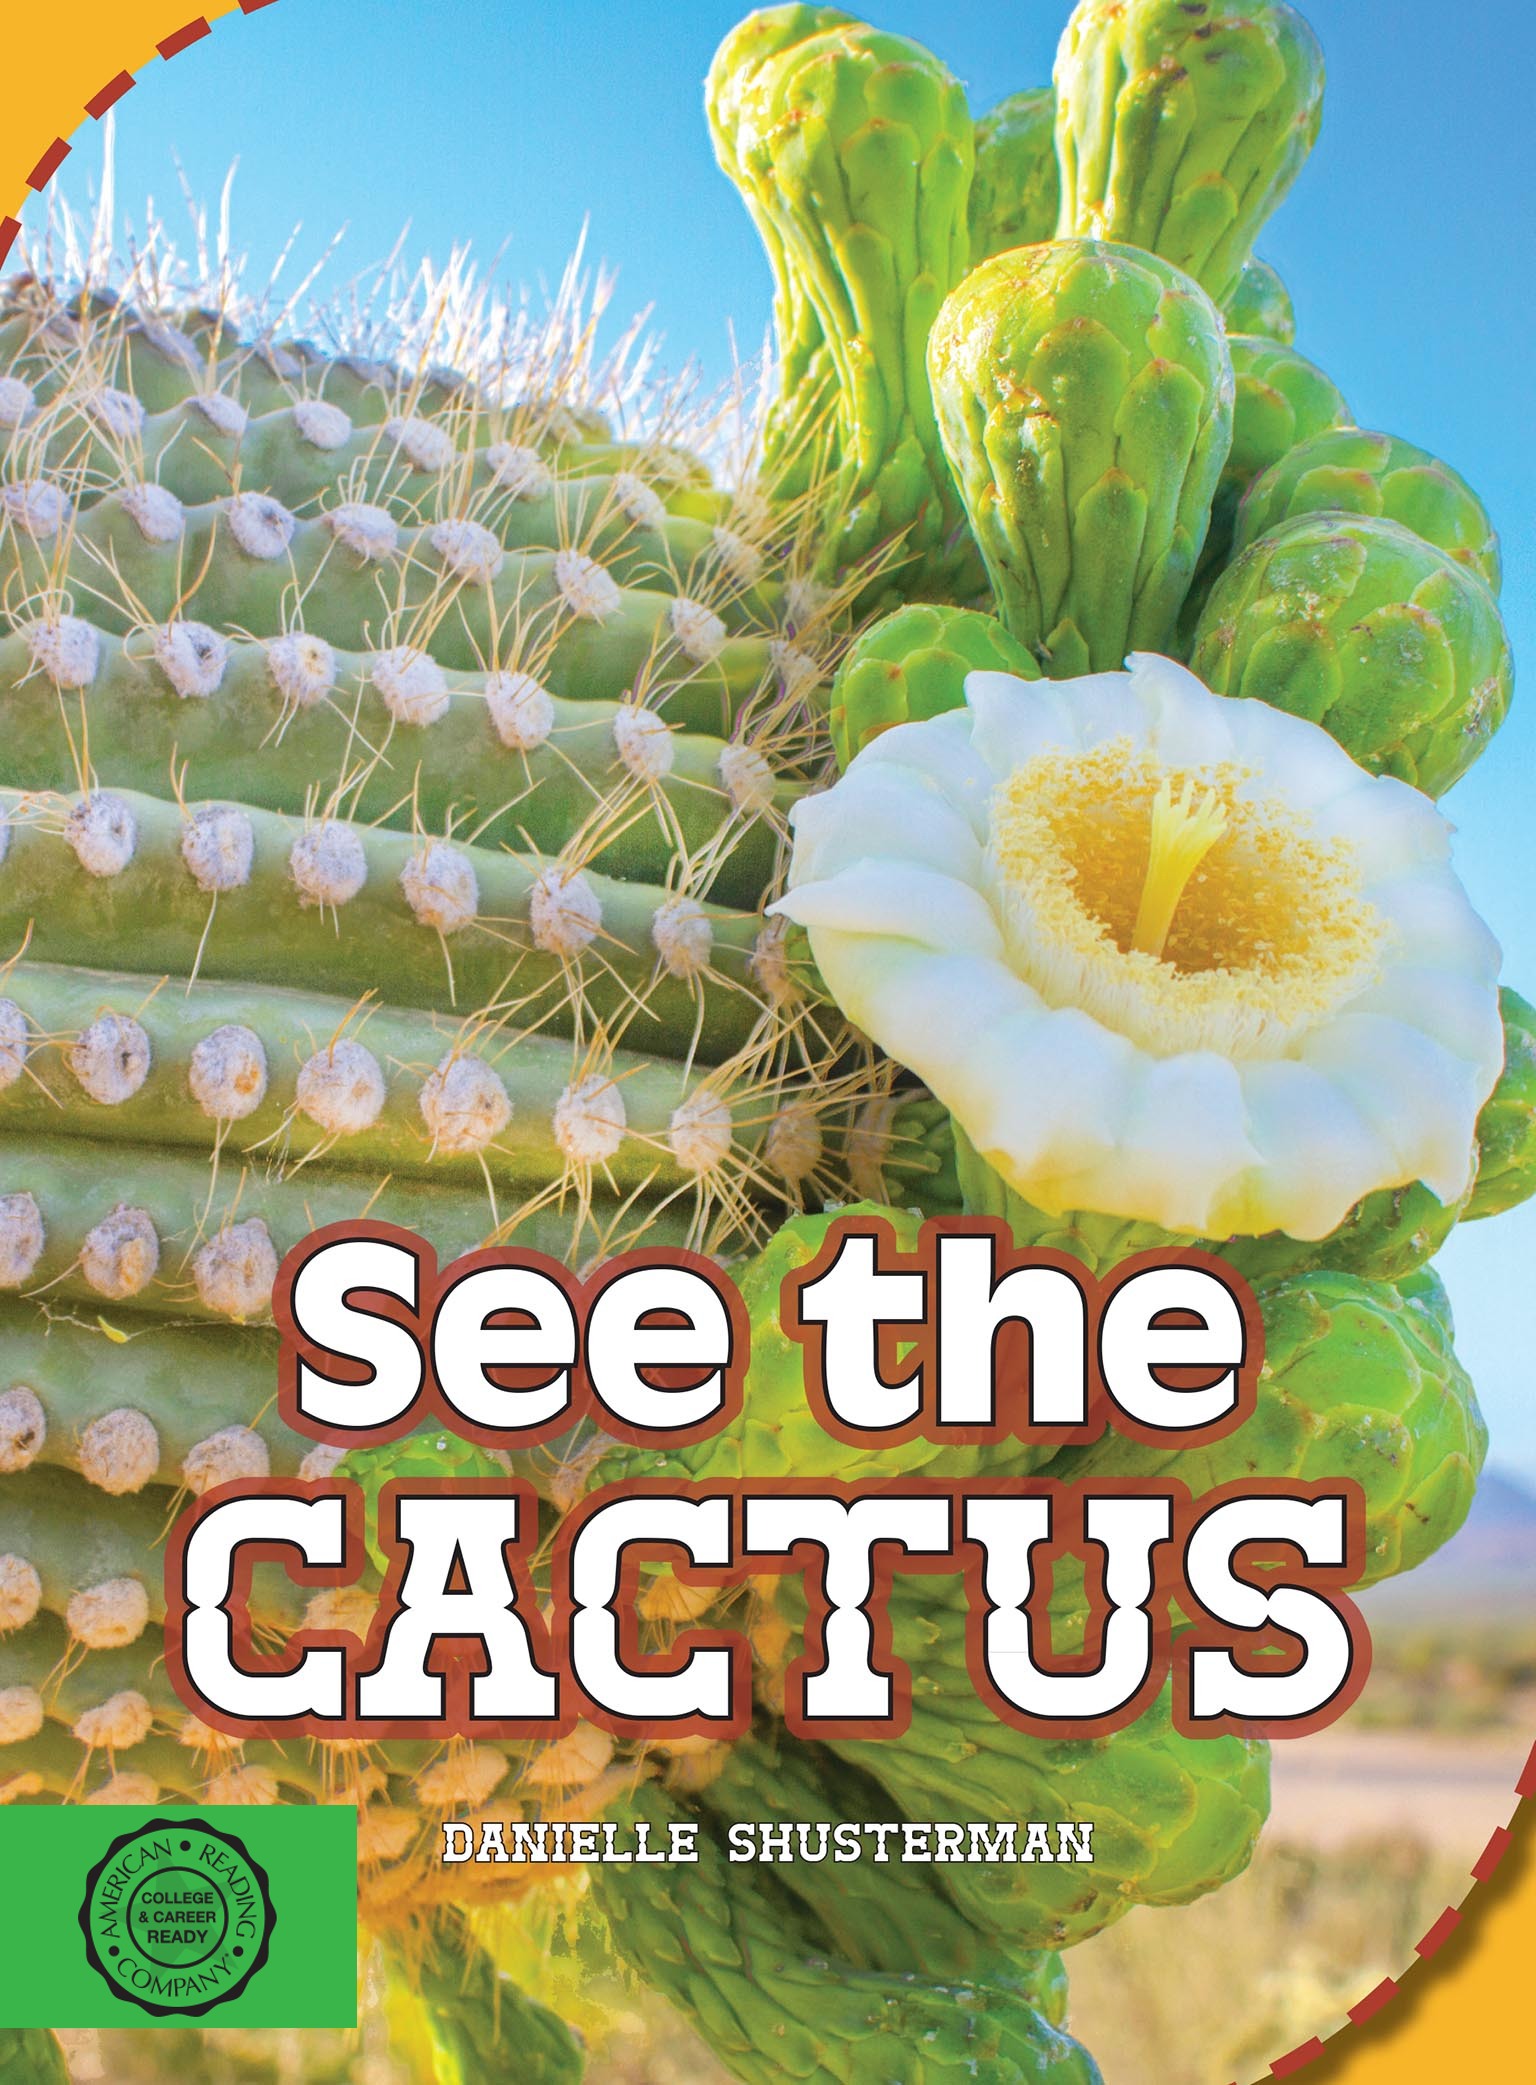 See the Cactus by Danielle Shusterman (9781634376341)